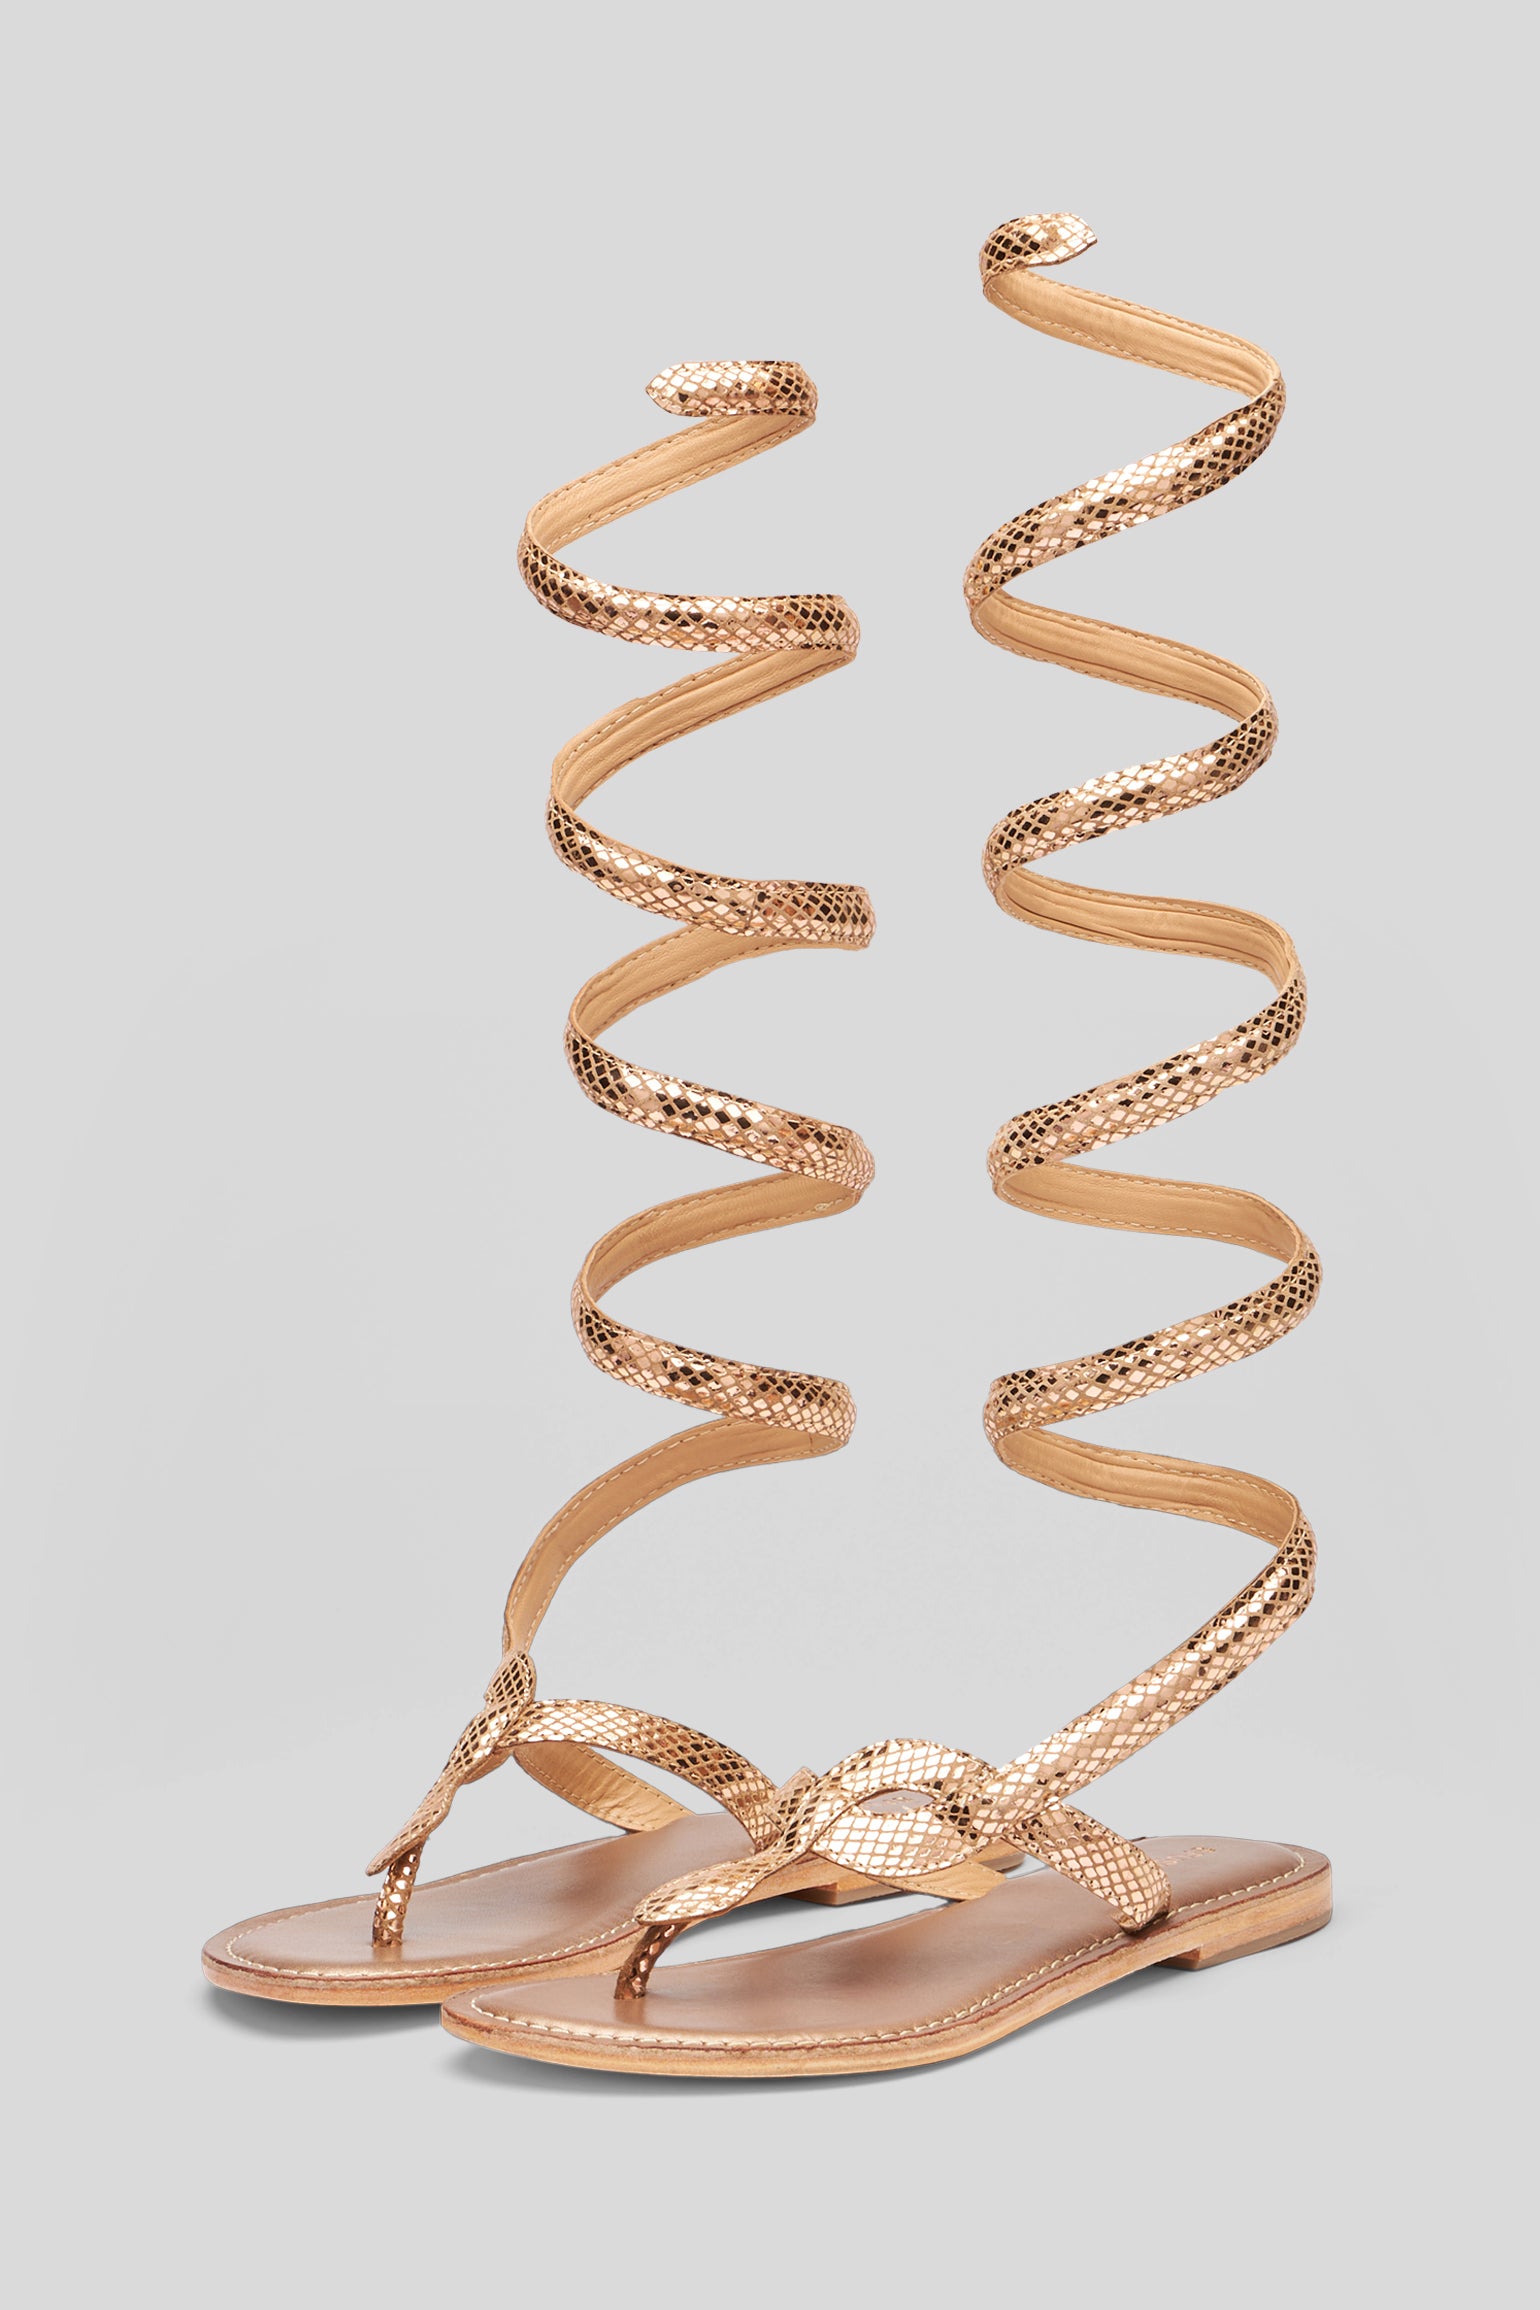 CB FUSION Wrap Up Sandal in Pink Gold Laminated Leather